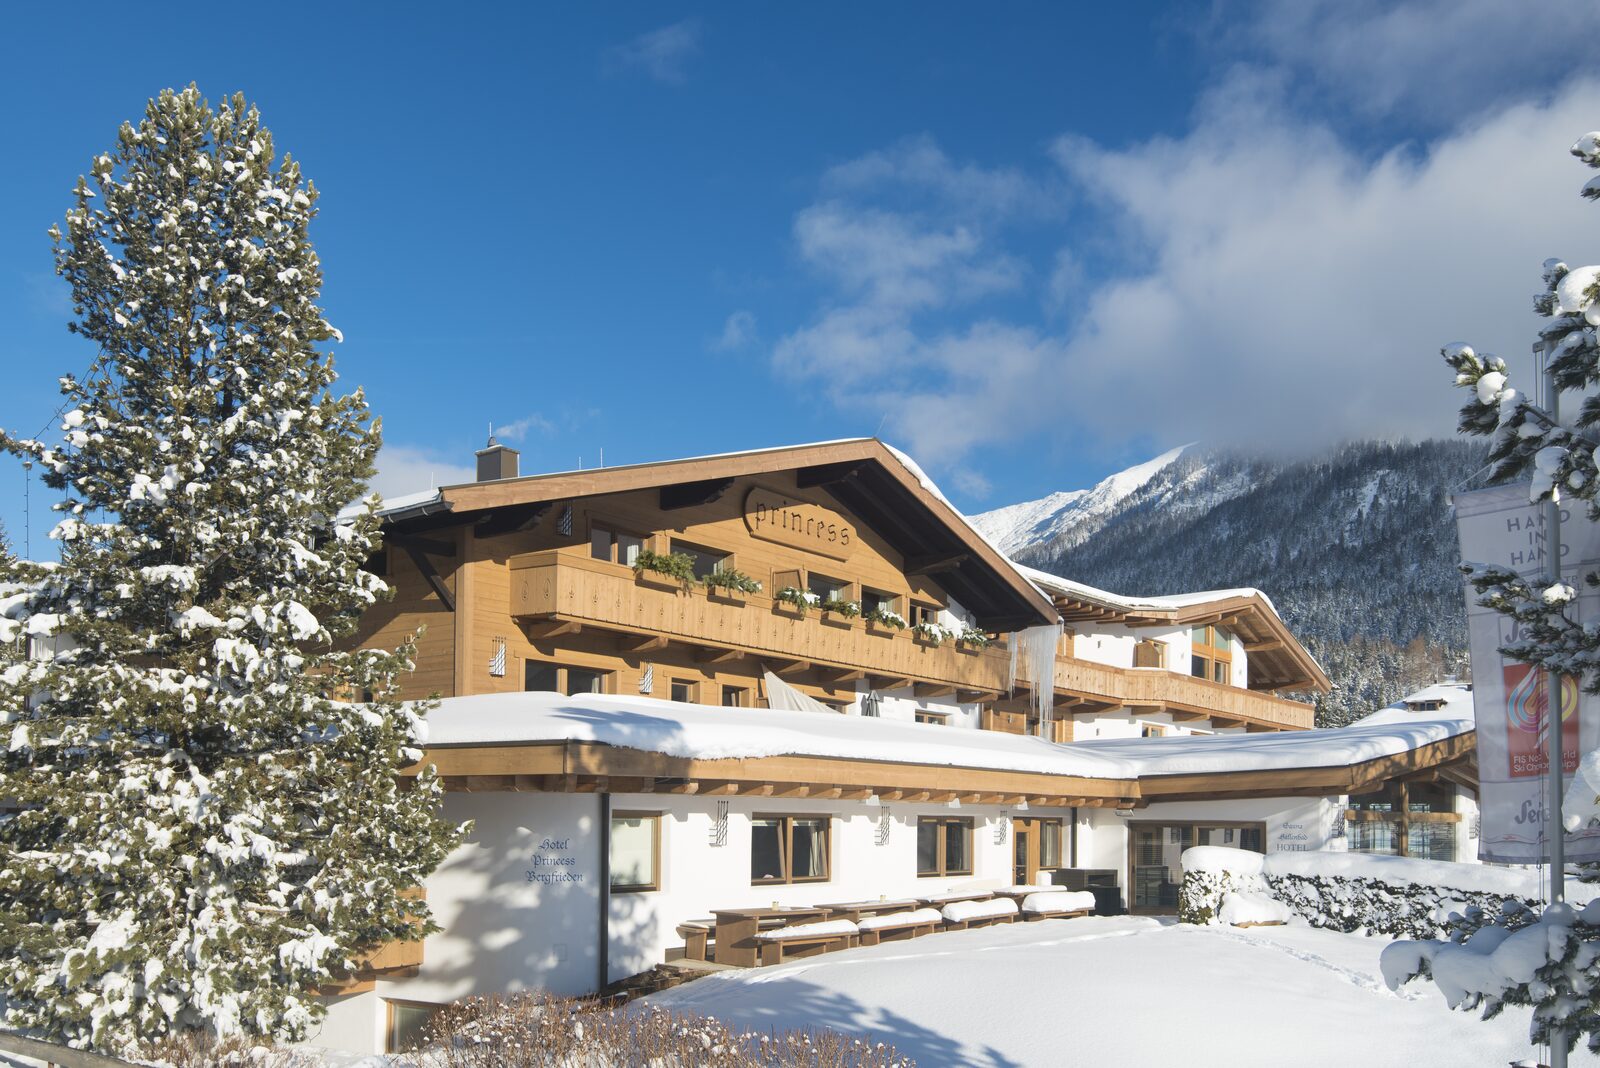 Oasis Bergfrieden Seefeld | Relax in the heart of the Tyrolean Alps